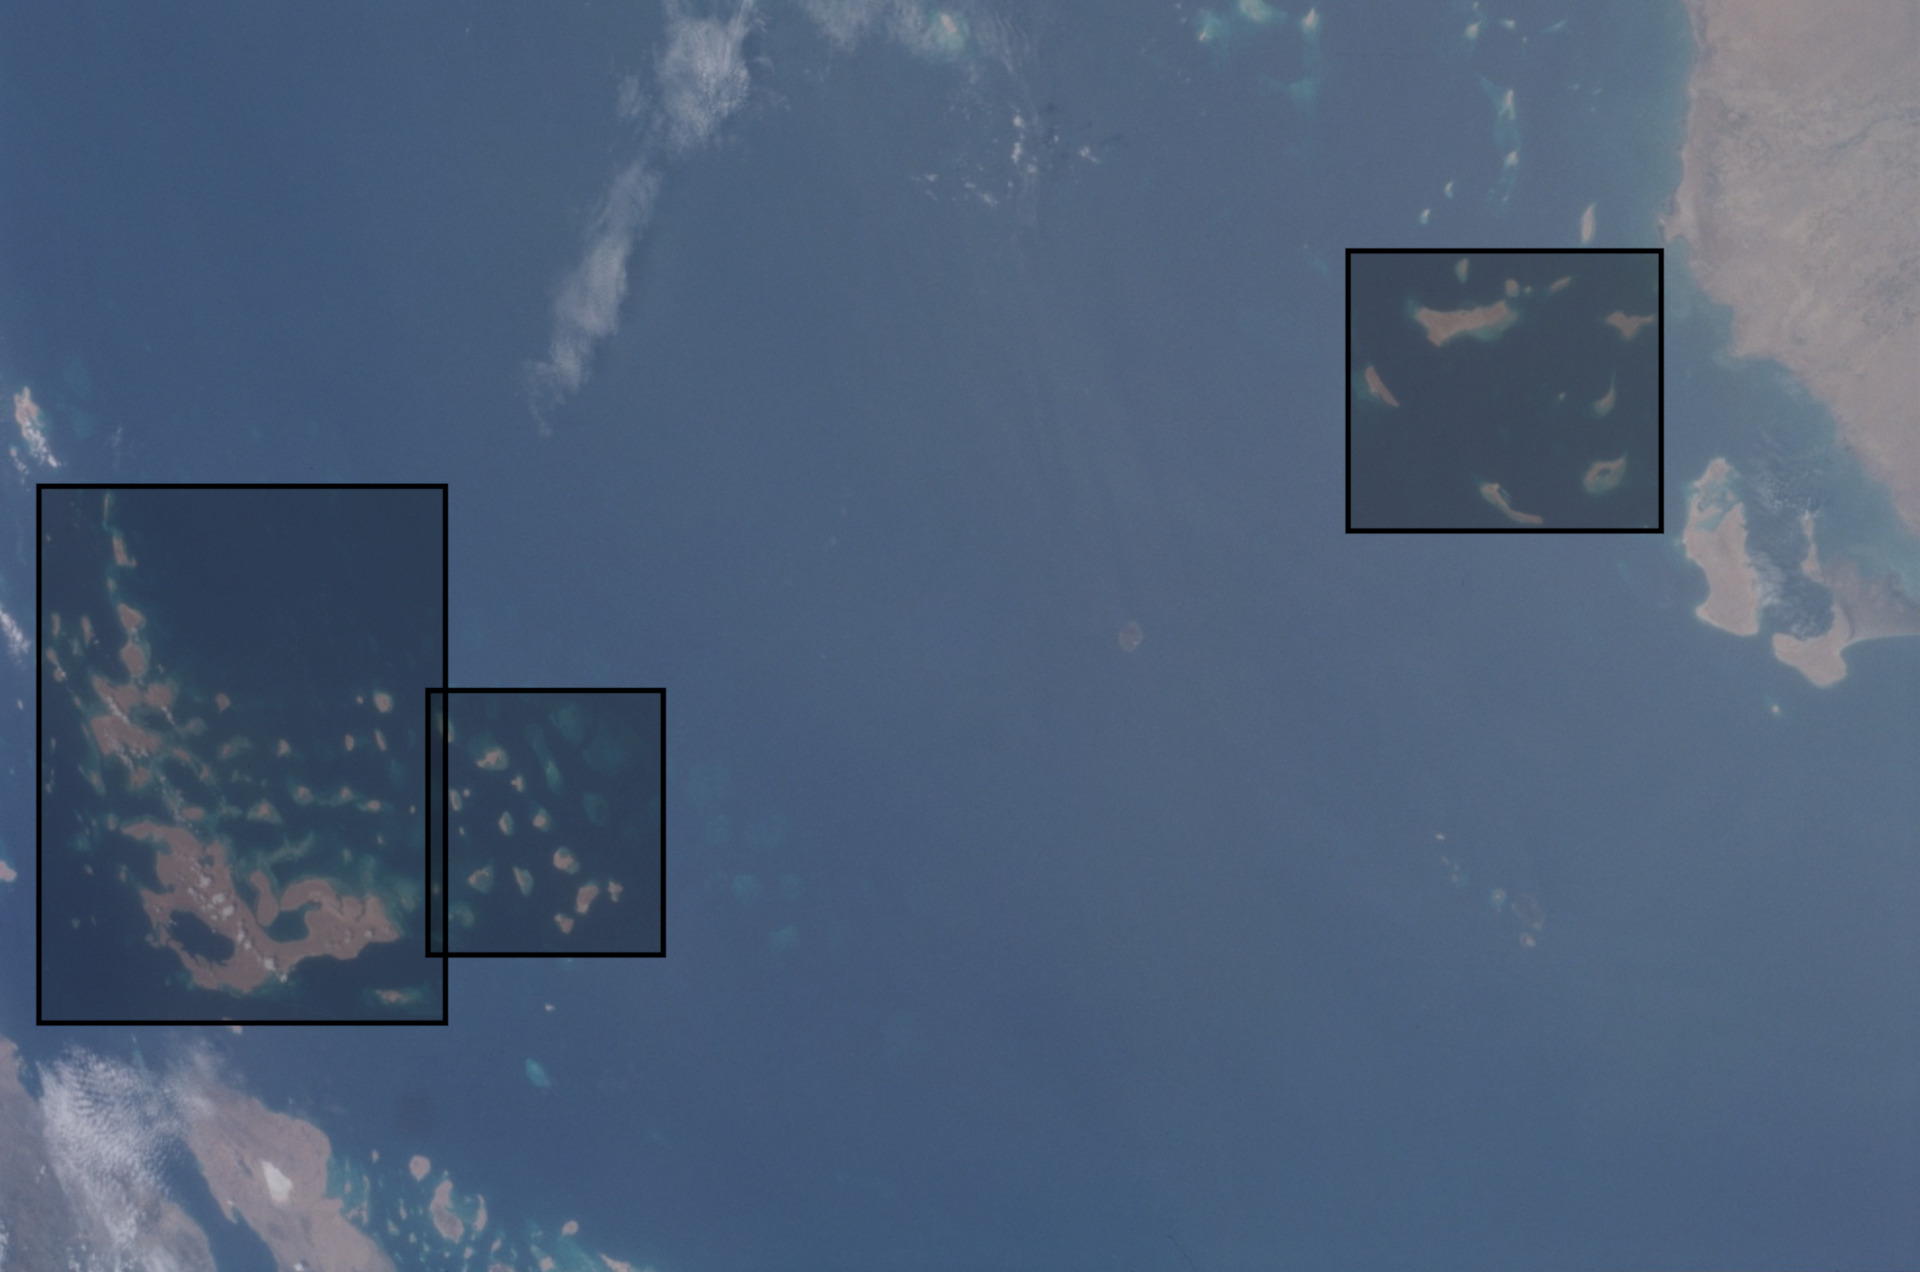  bounding boxes surrounding an island cluster